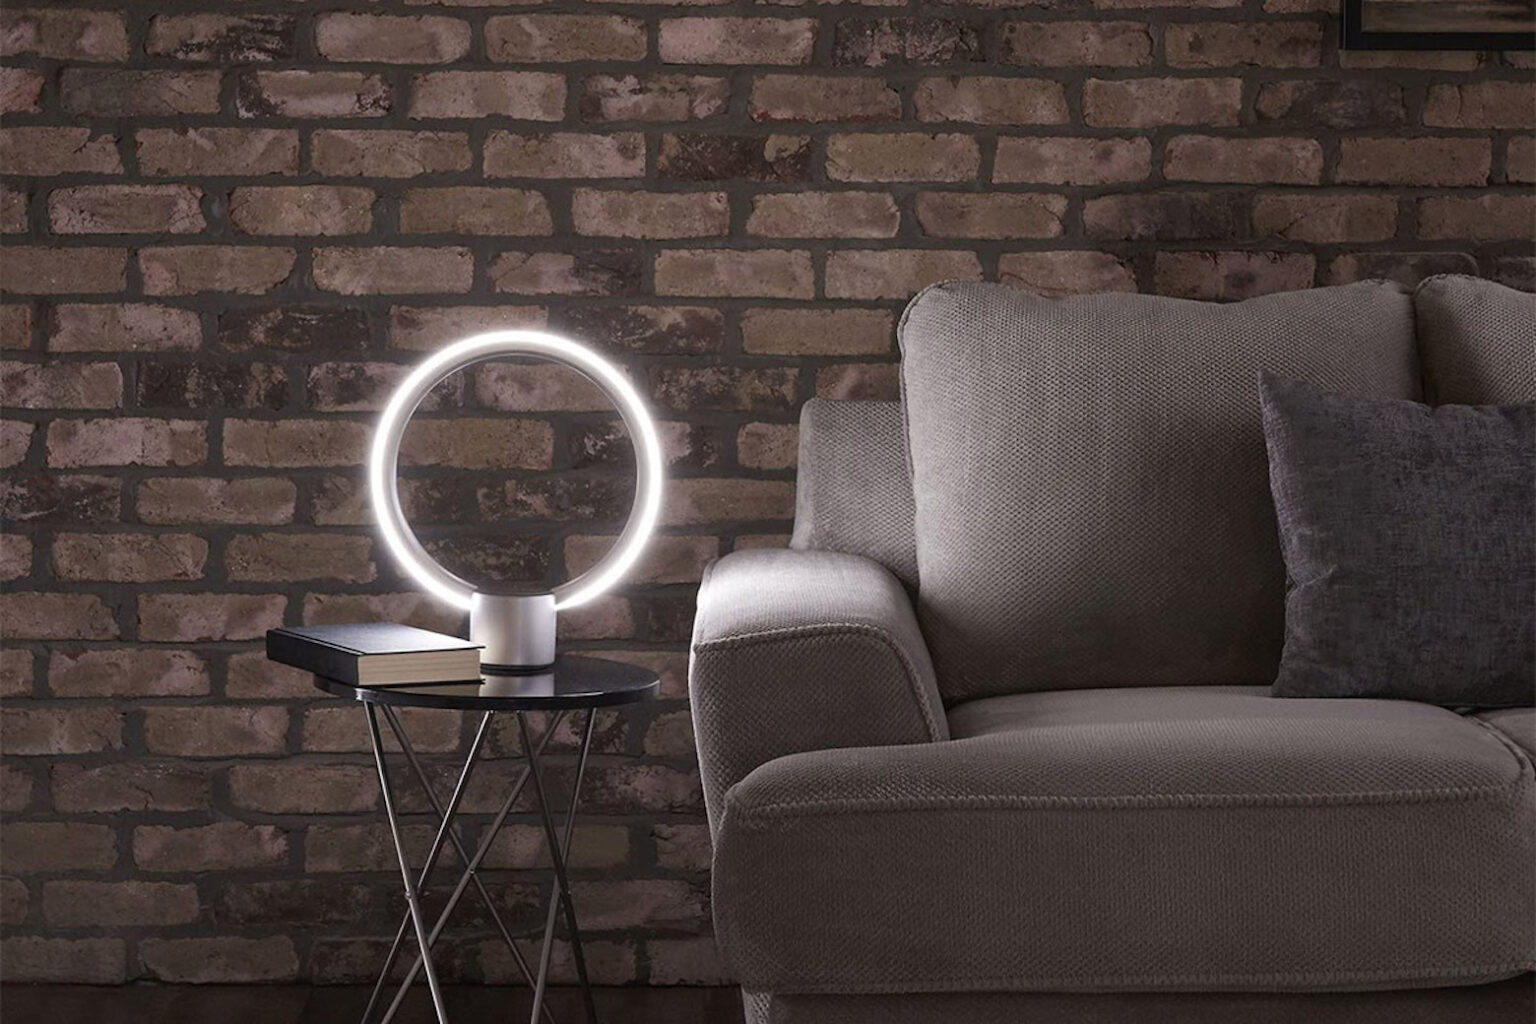 This smart light has the features and functionality of Amazon Alexa